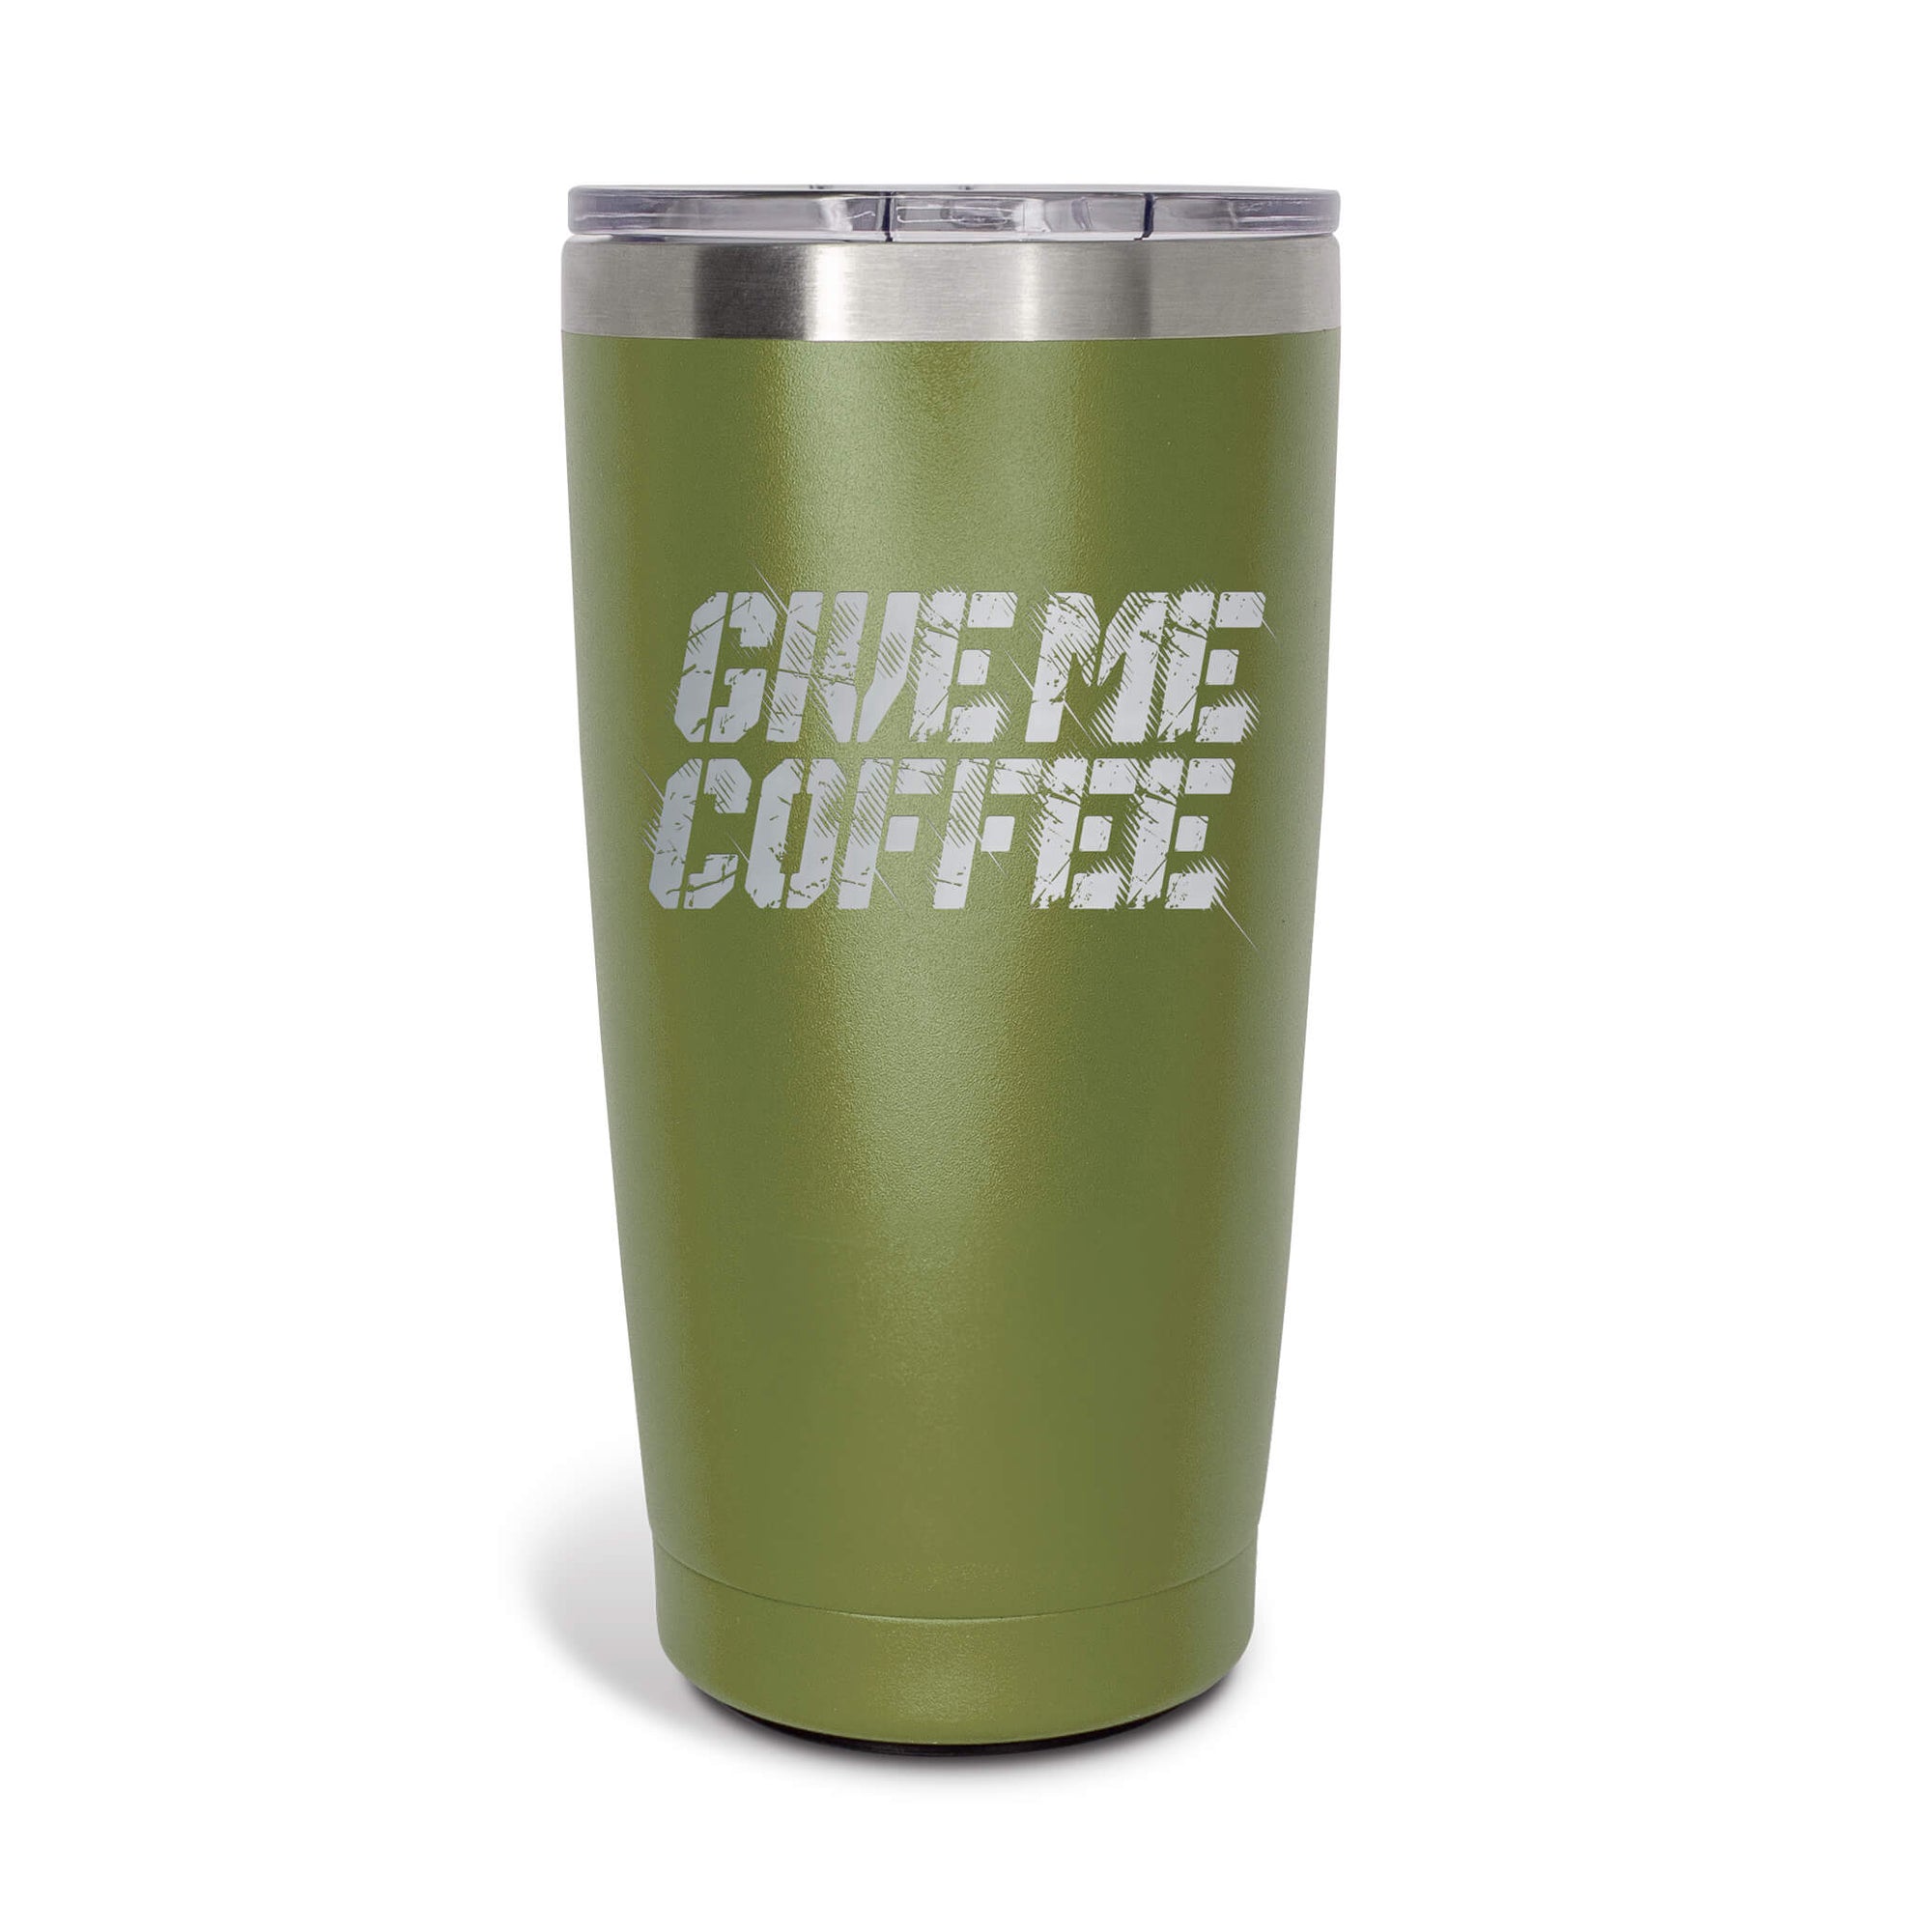 A green tumbler that says GIVE ME COFFEE on the front.